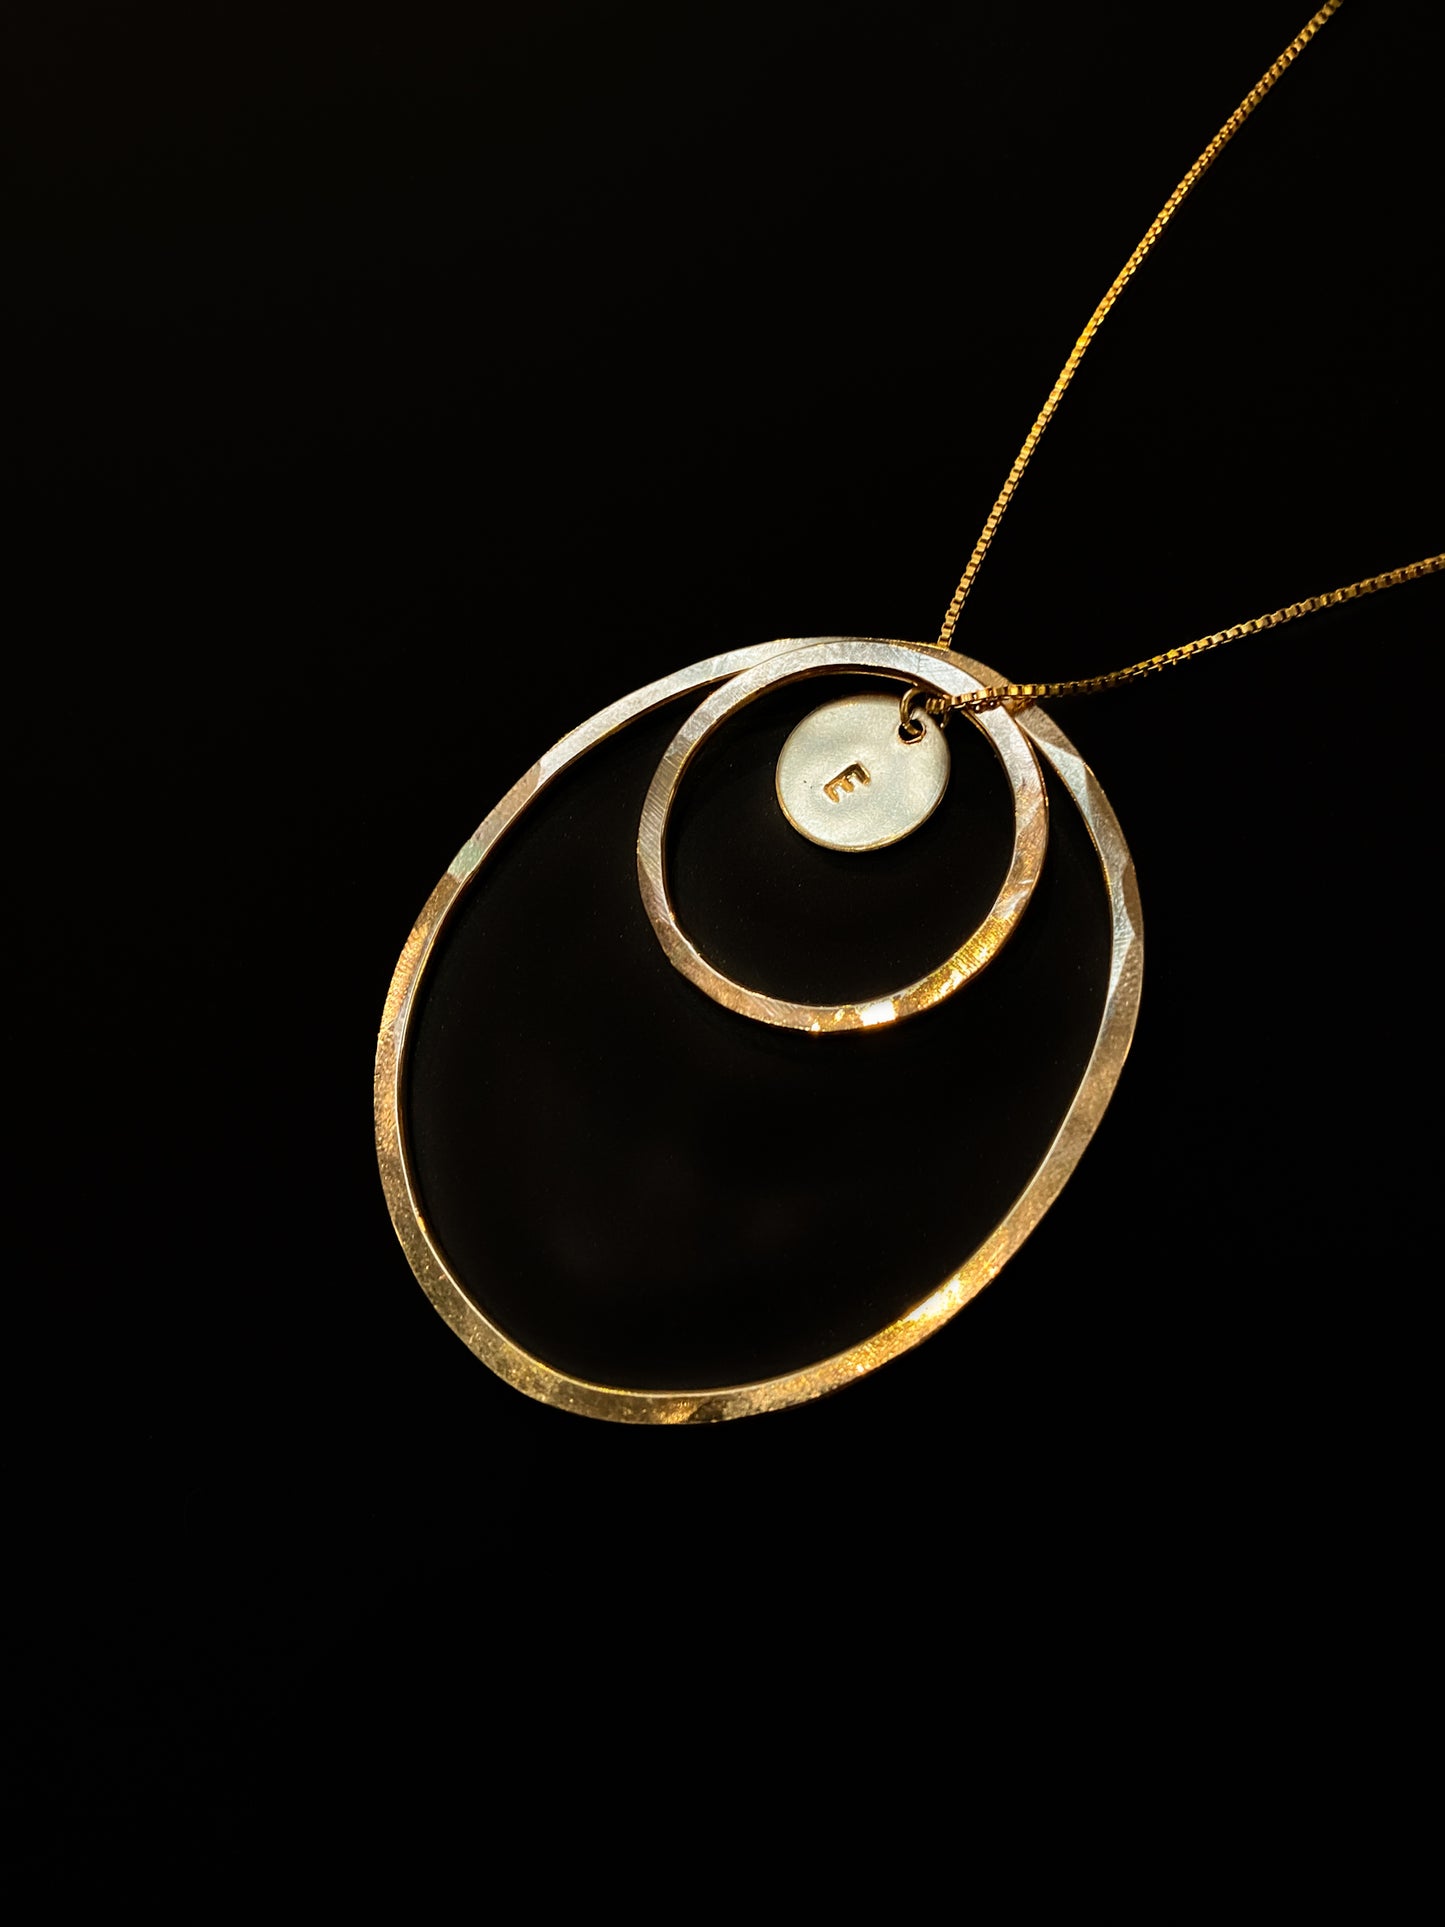 Small Circle Pendant in Gold Fill, Rose Gold Fill, or Sterling Silver